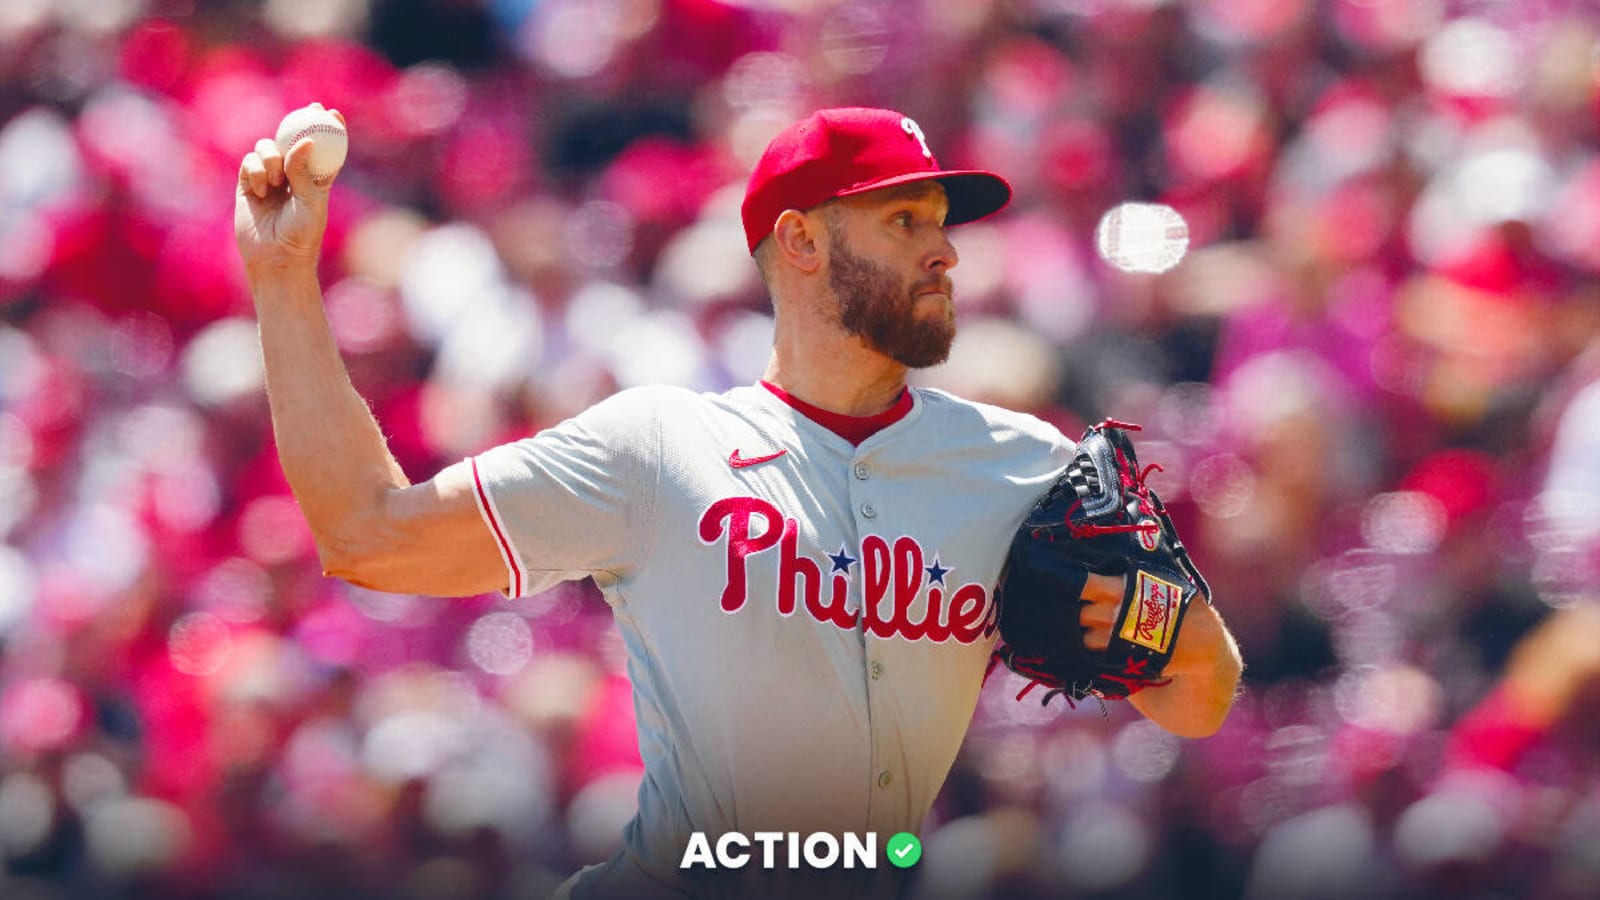 MLB best bets: Phillies vs. Giants odds, pick, prediction for Monday 5/6